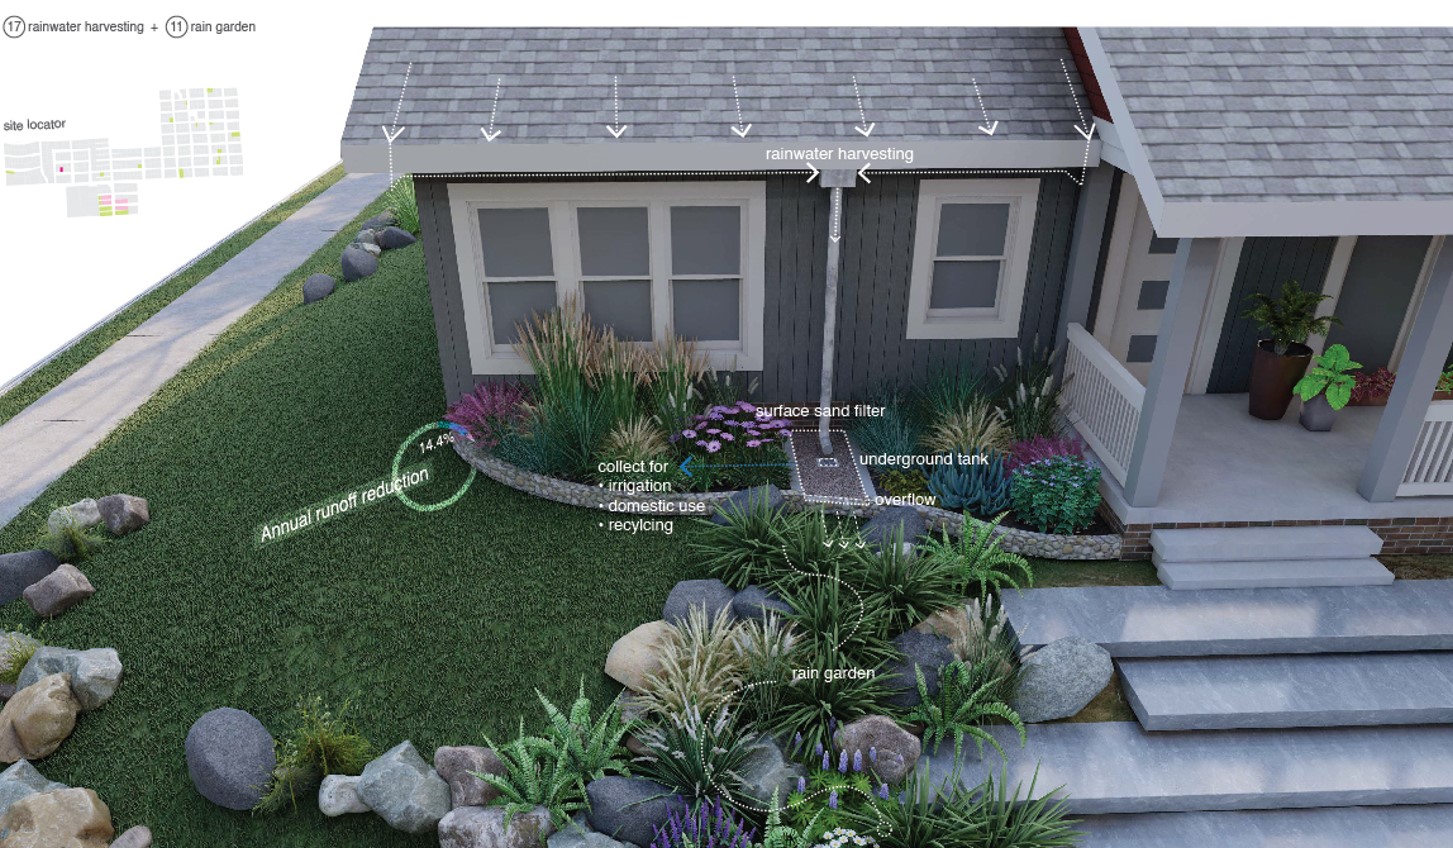 The the Adaptive Stormbox includes rain gardens, sand filters to collect runoff, and rainwater harvesting systems.